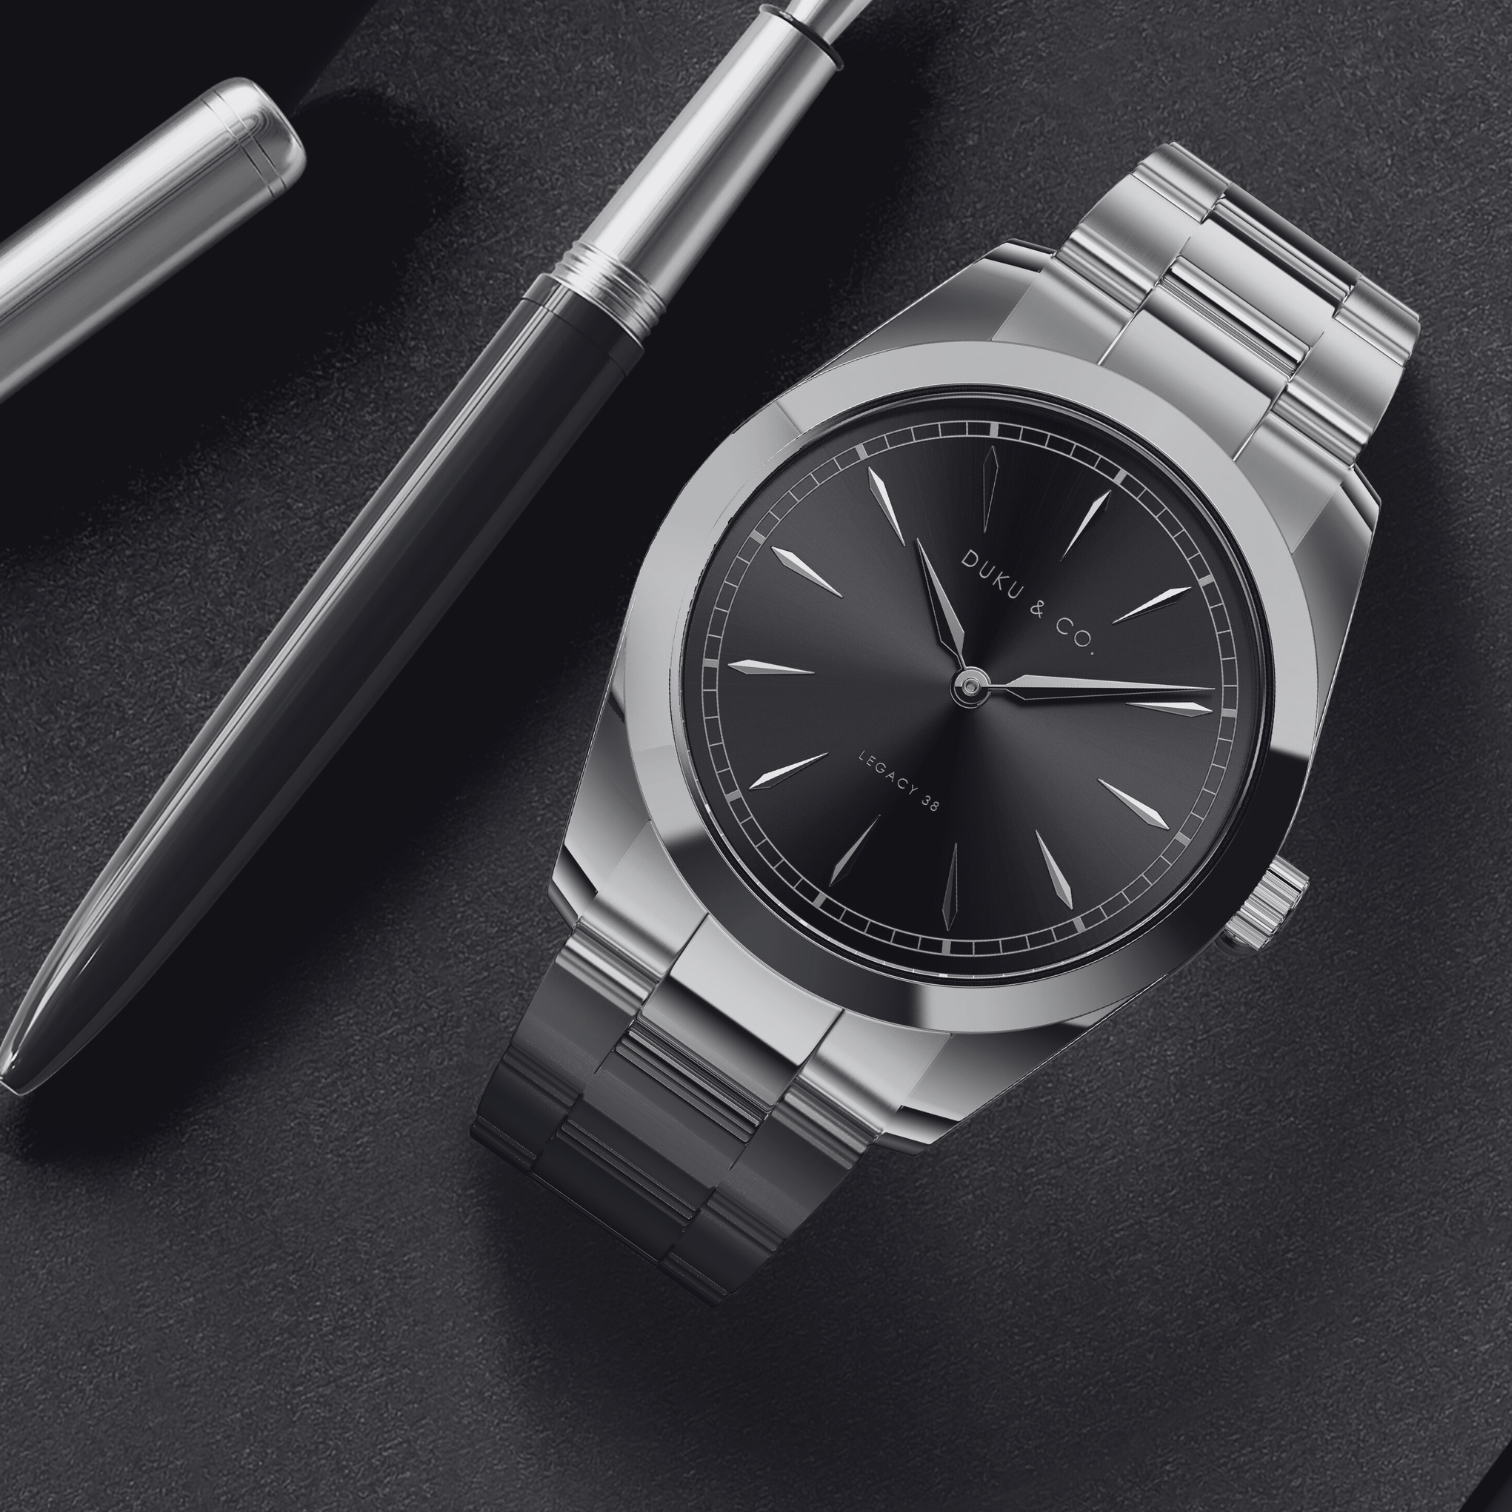 Pen and Stainless steel watch from Duku & Co.